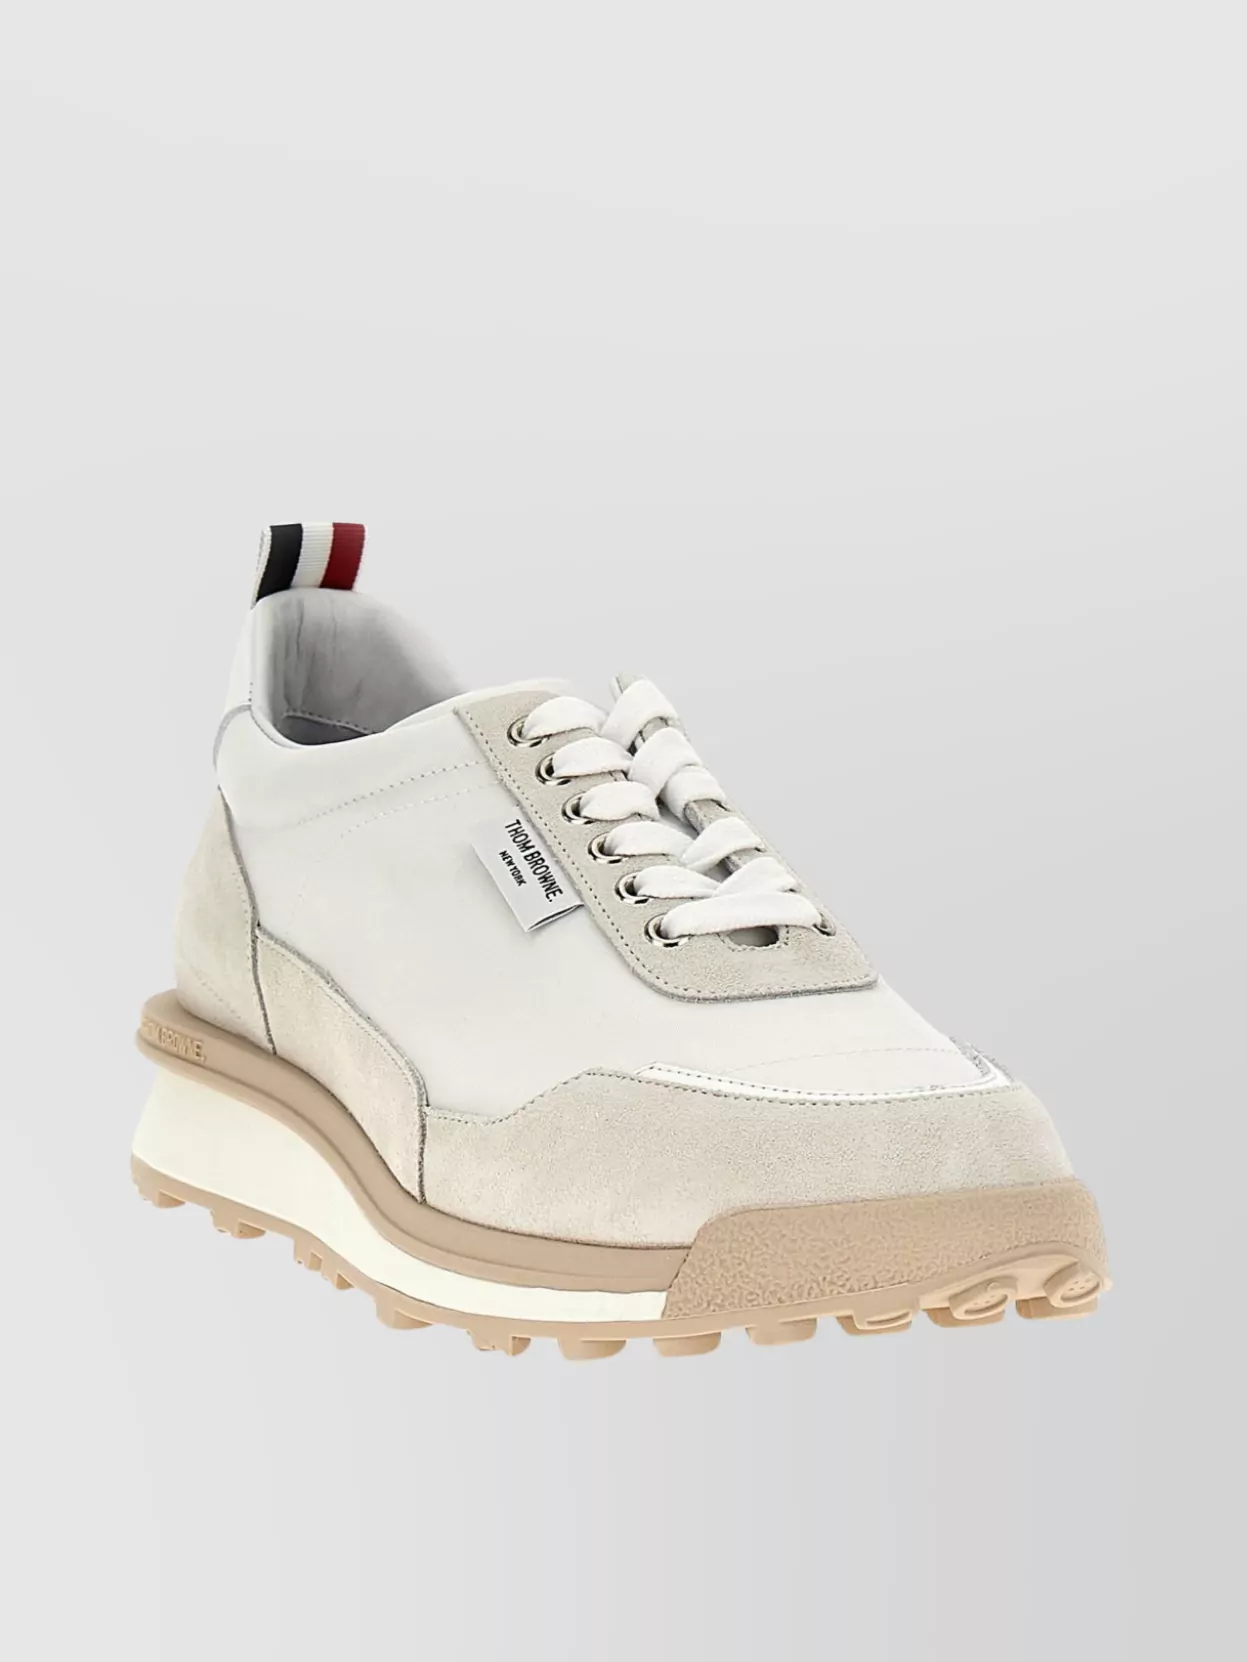 Shop Thom Browne 'alumni Trainer' Sneakers Featuring Pull Tab